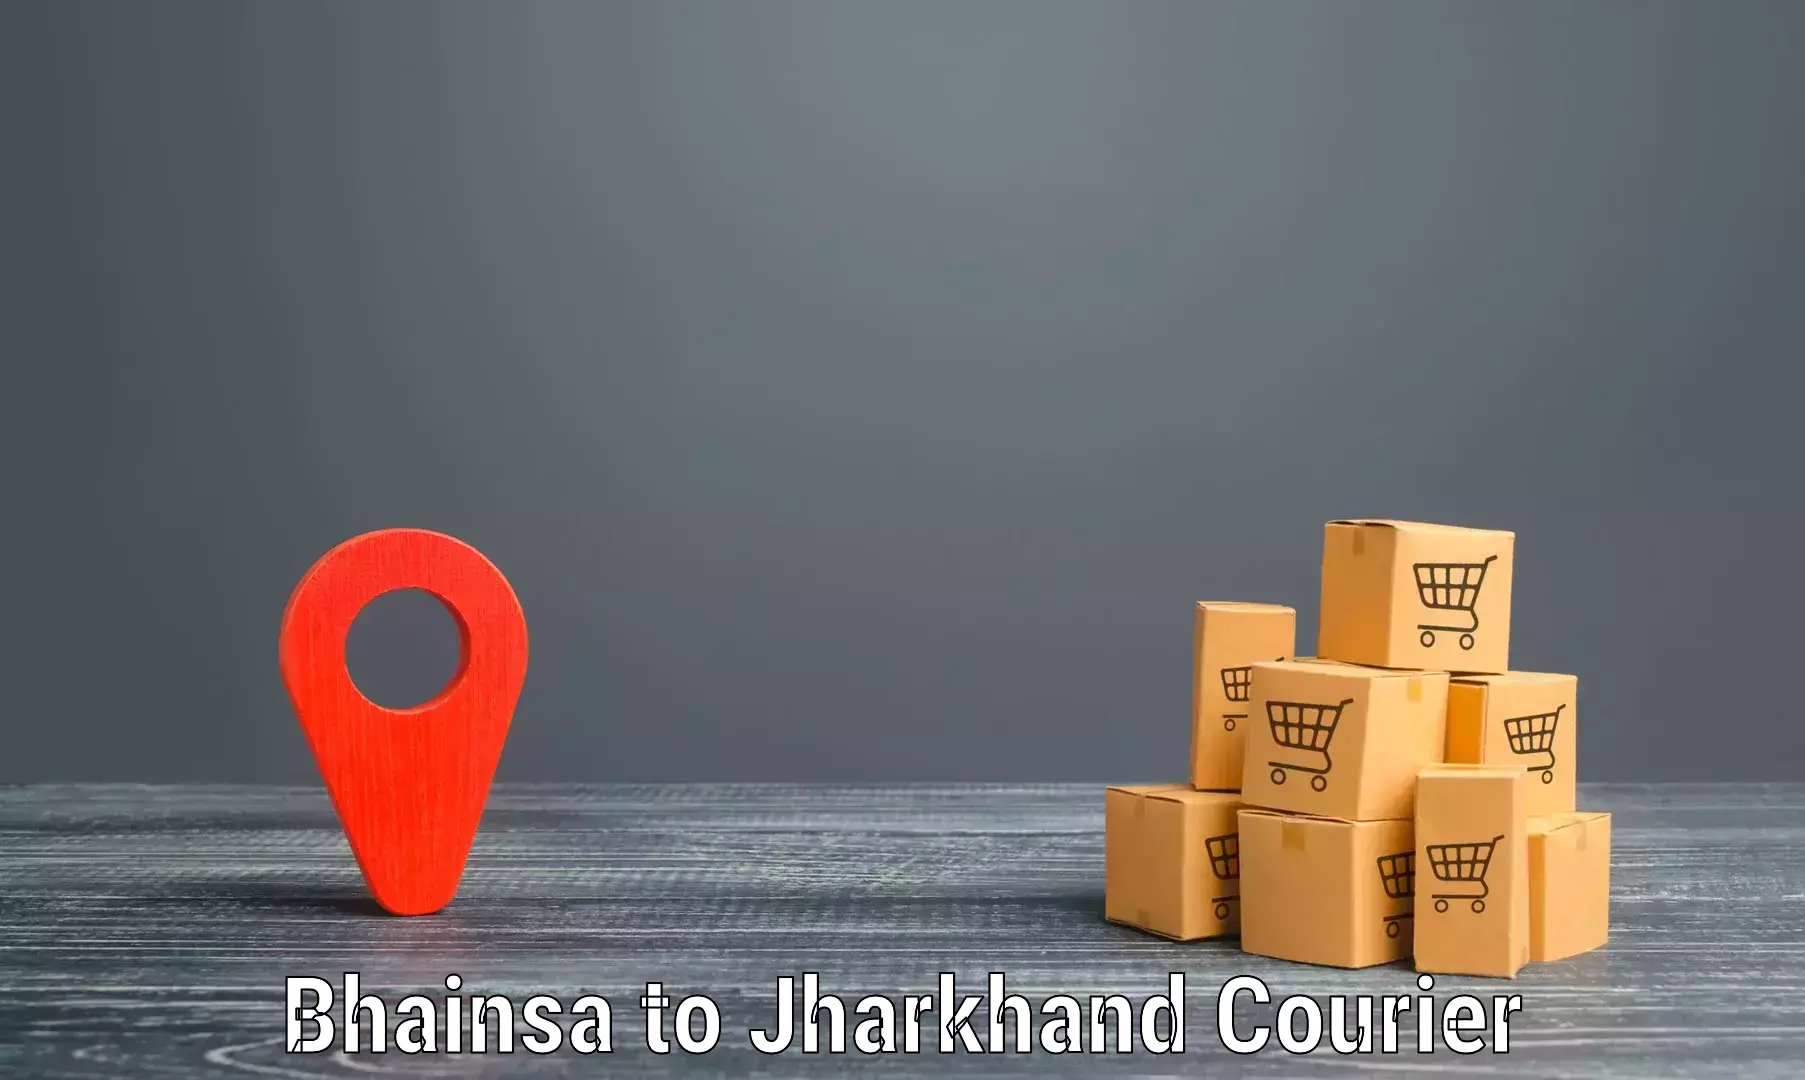 End-to-end delivery Bhainsa to Ranchi